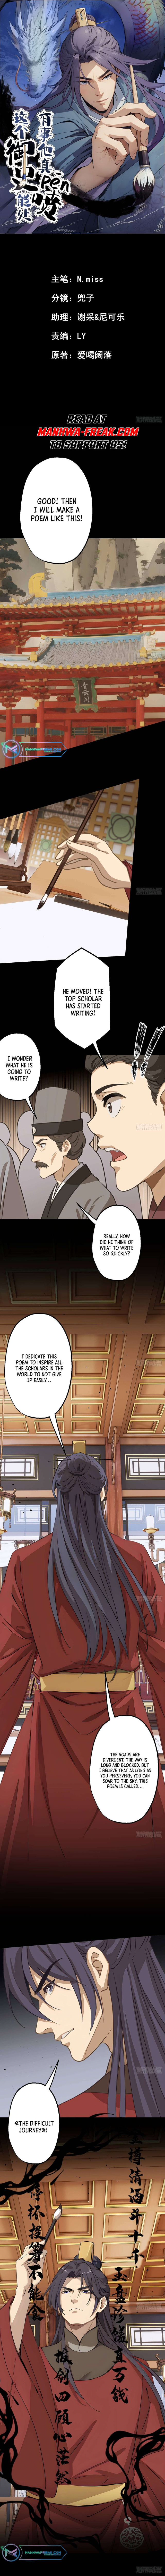 The Imperial Censor Who Can Handle It  He Speaks Truly When There’s Trouble - chapter 8 - #2